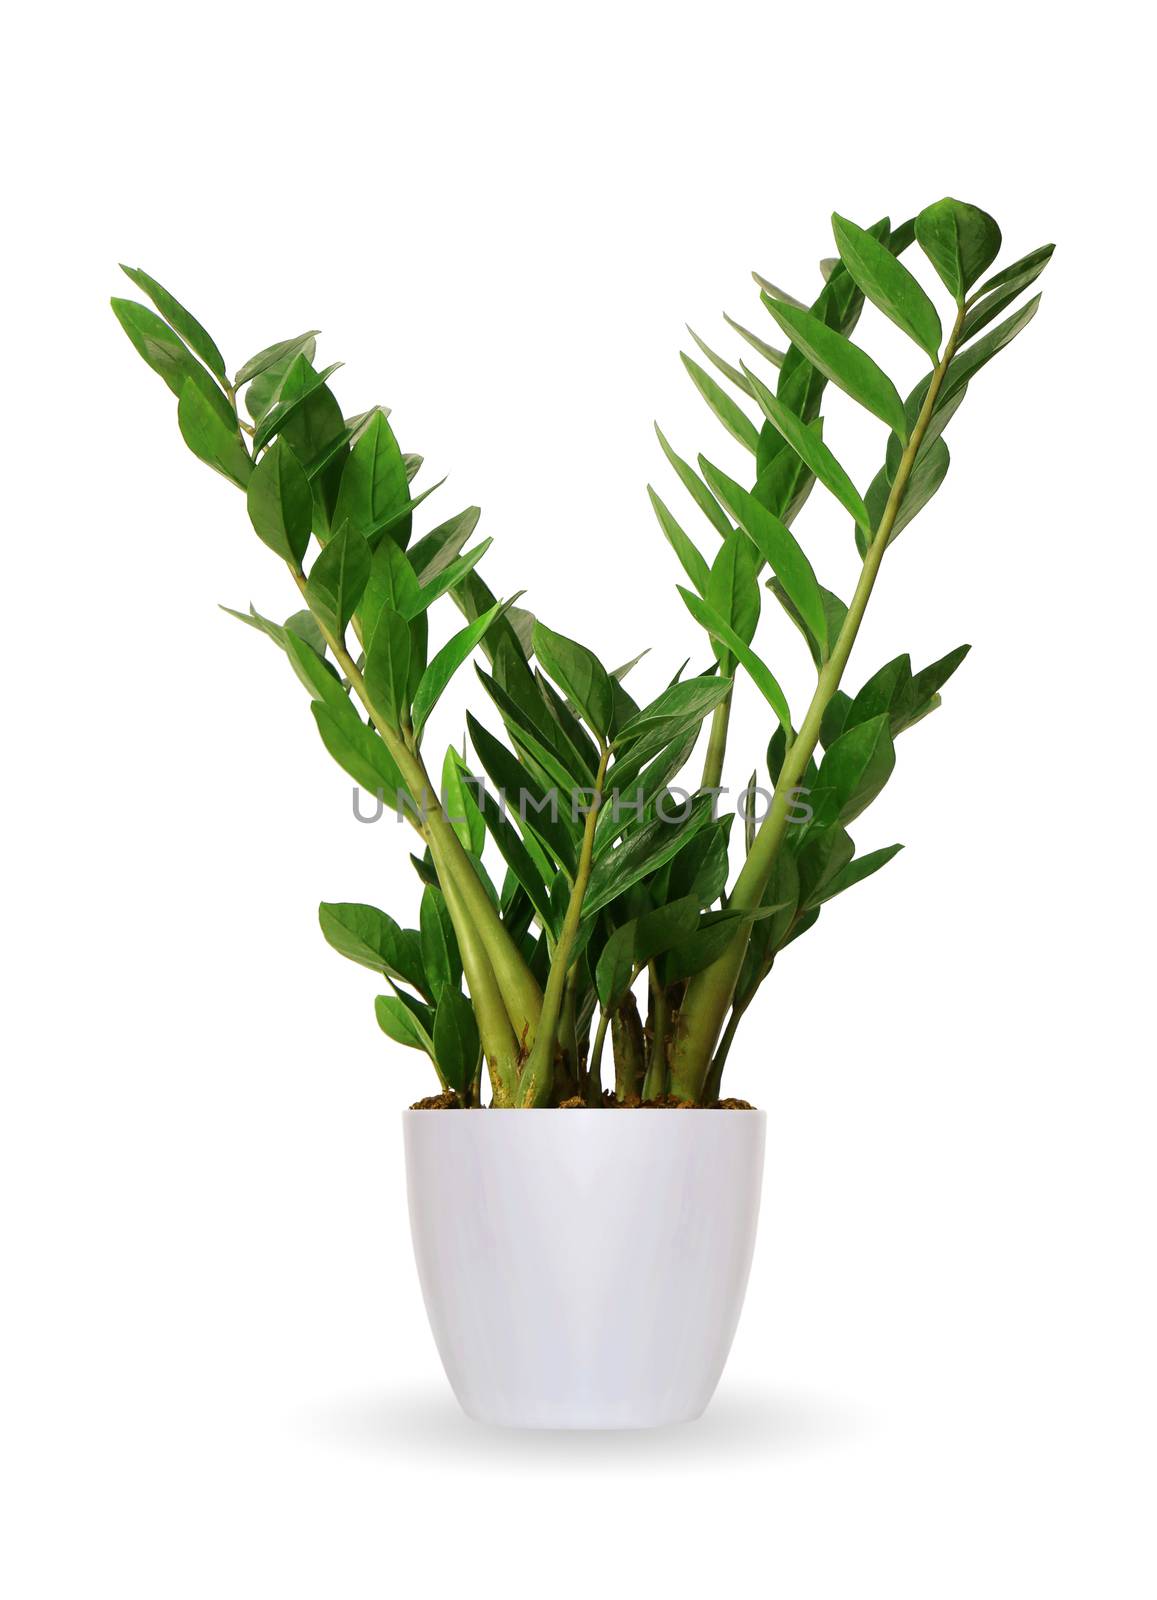 Houseplant - Zamioculcas a potted plant isolated over white by kav777